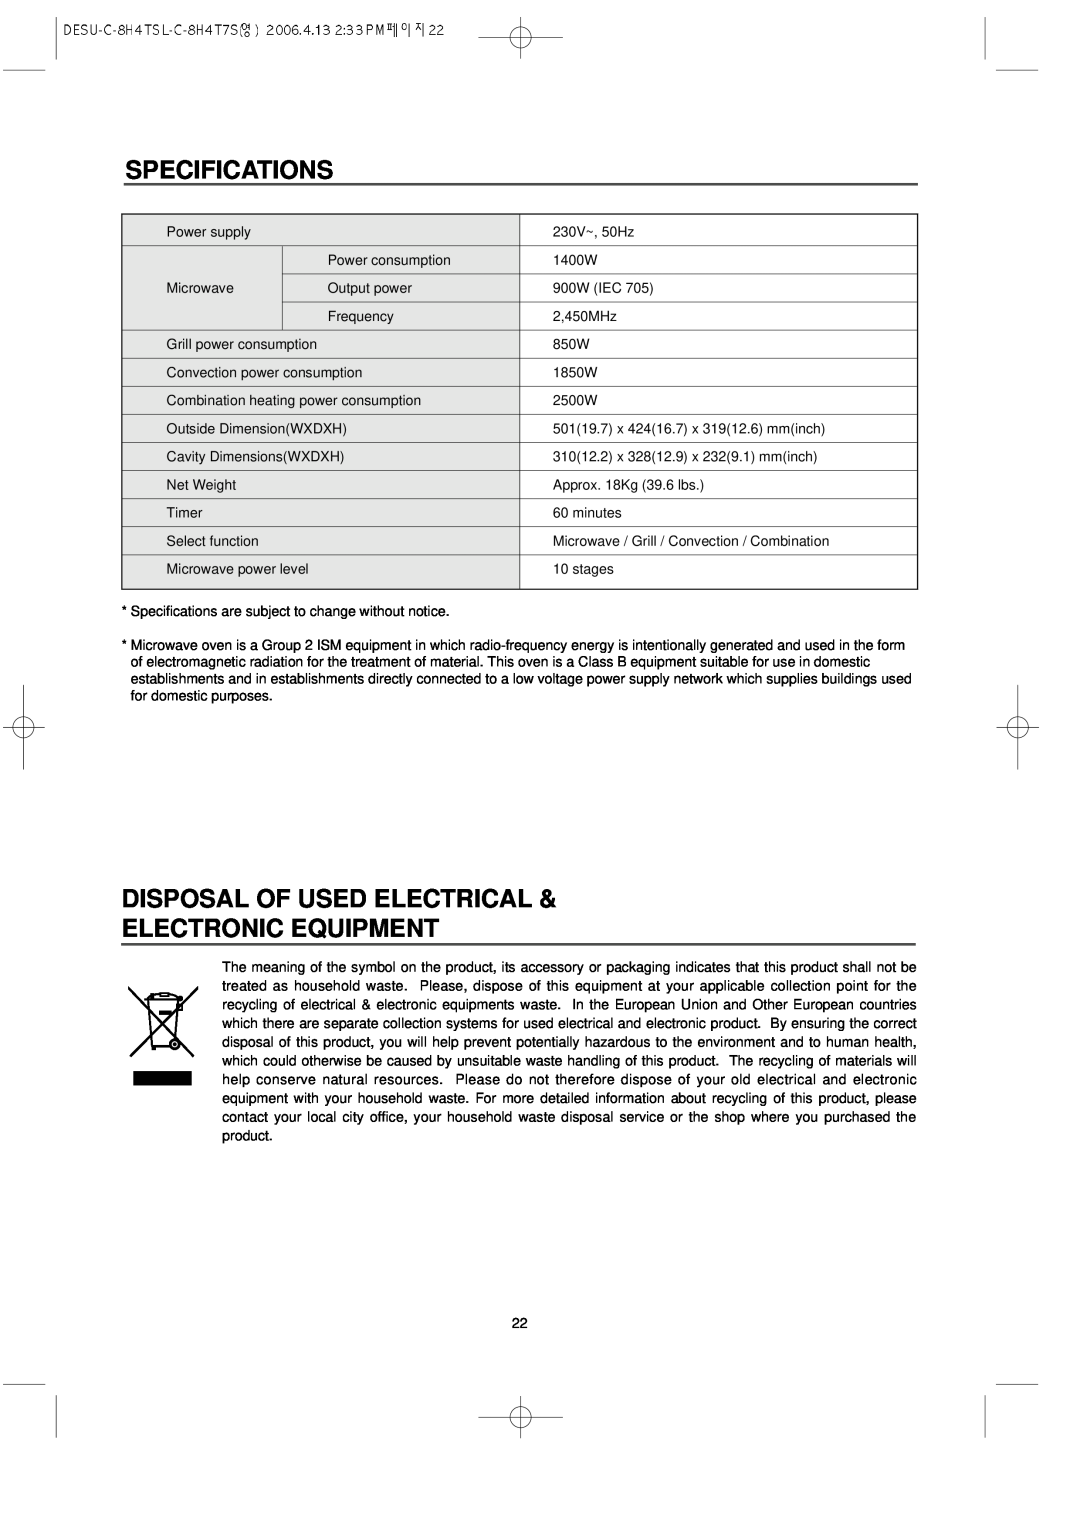 Daewoo KOC-8H4TSL owner manual Specifications, Disposal Of Used Electrical Electronic Equipment 